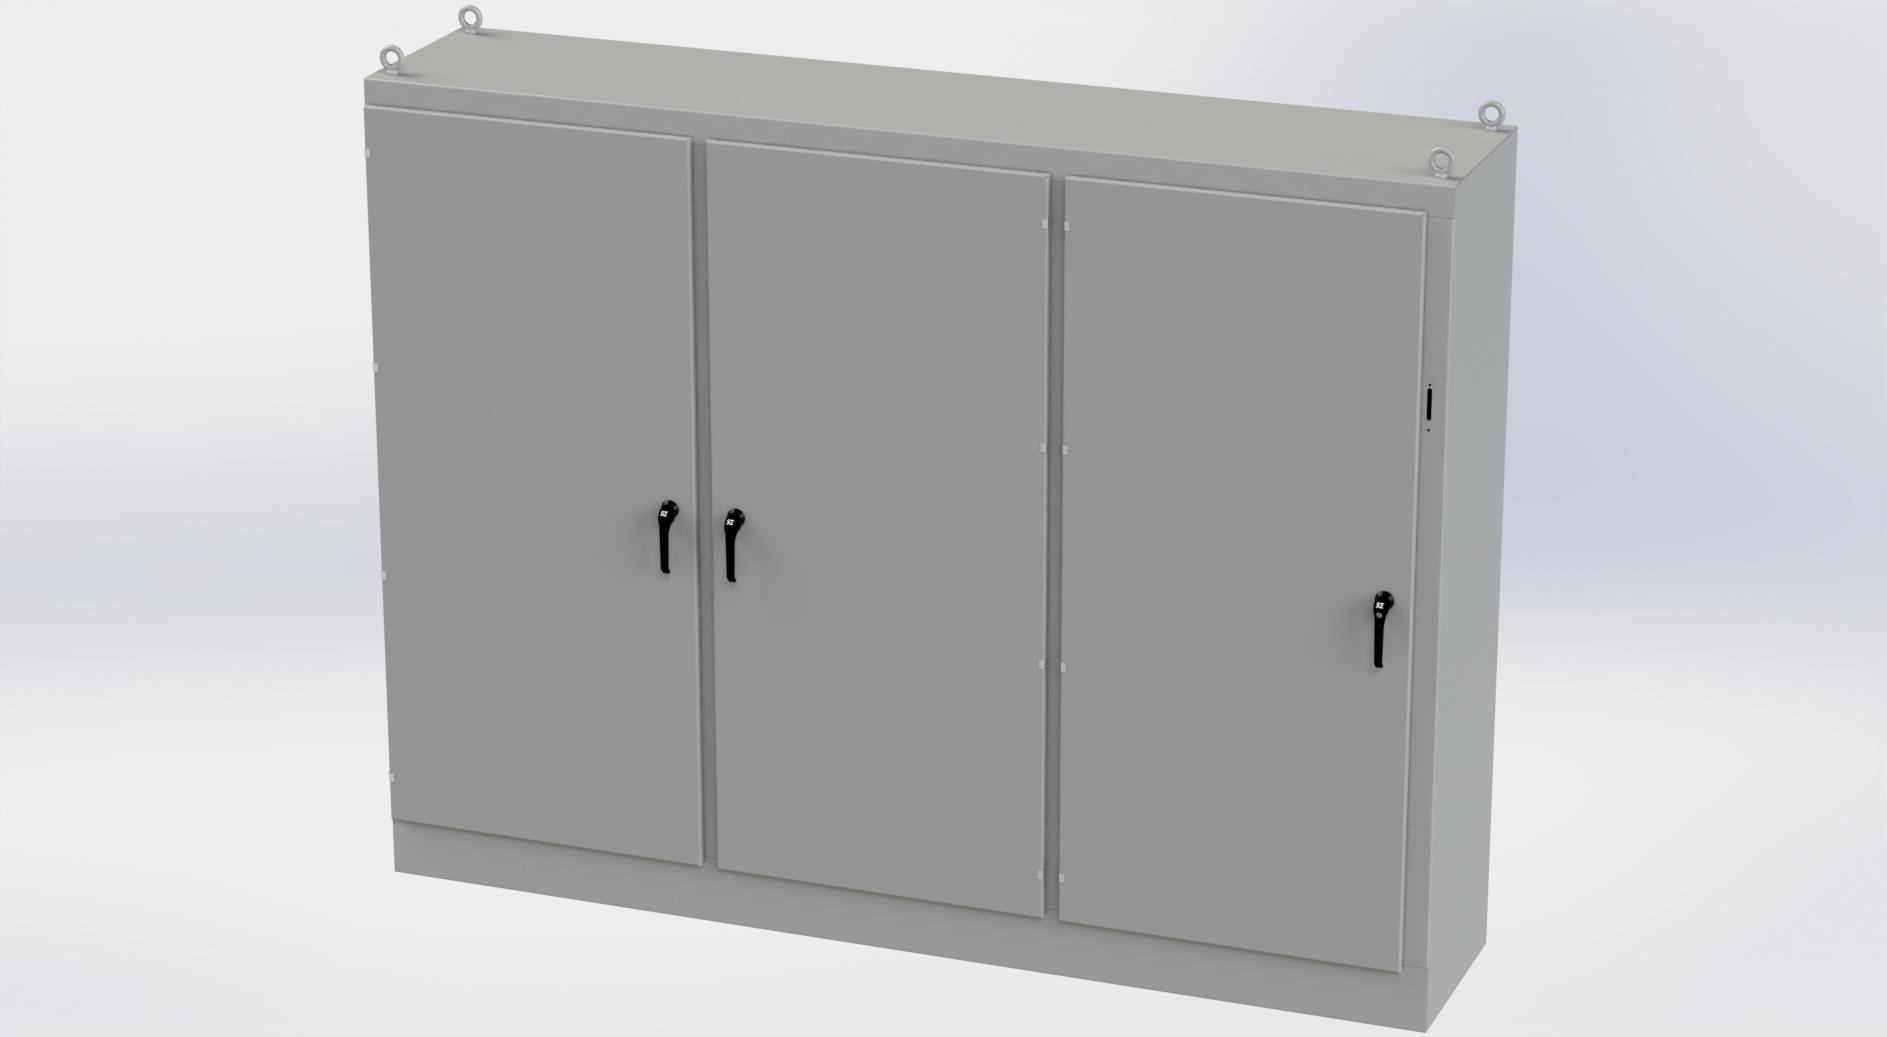 Saginaw Control SCE-90XM3EW24 3DR XM Enclosure, Height:90.00", Width:117.50", Depth:24.00", ANSI-61 gray powder coating inside and out. Sub-panels are powder coated white.